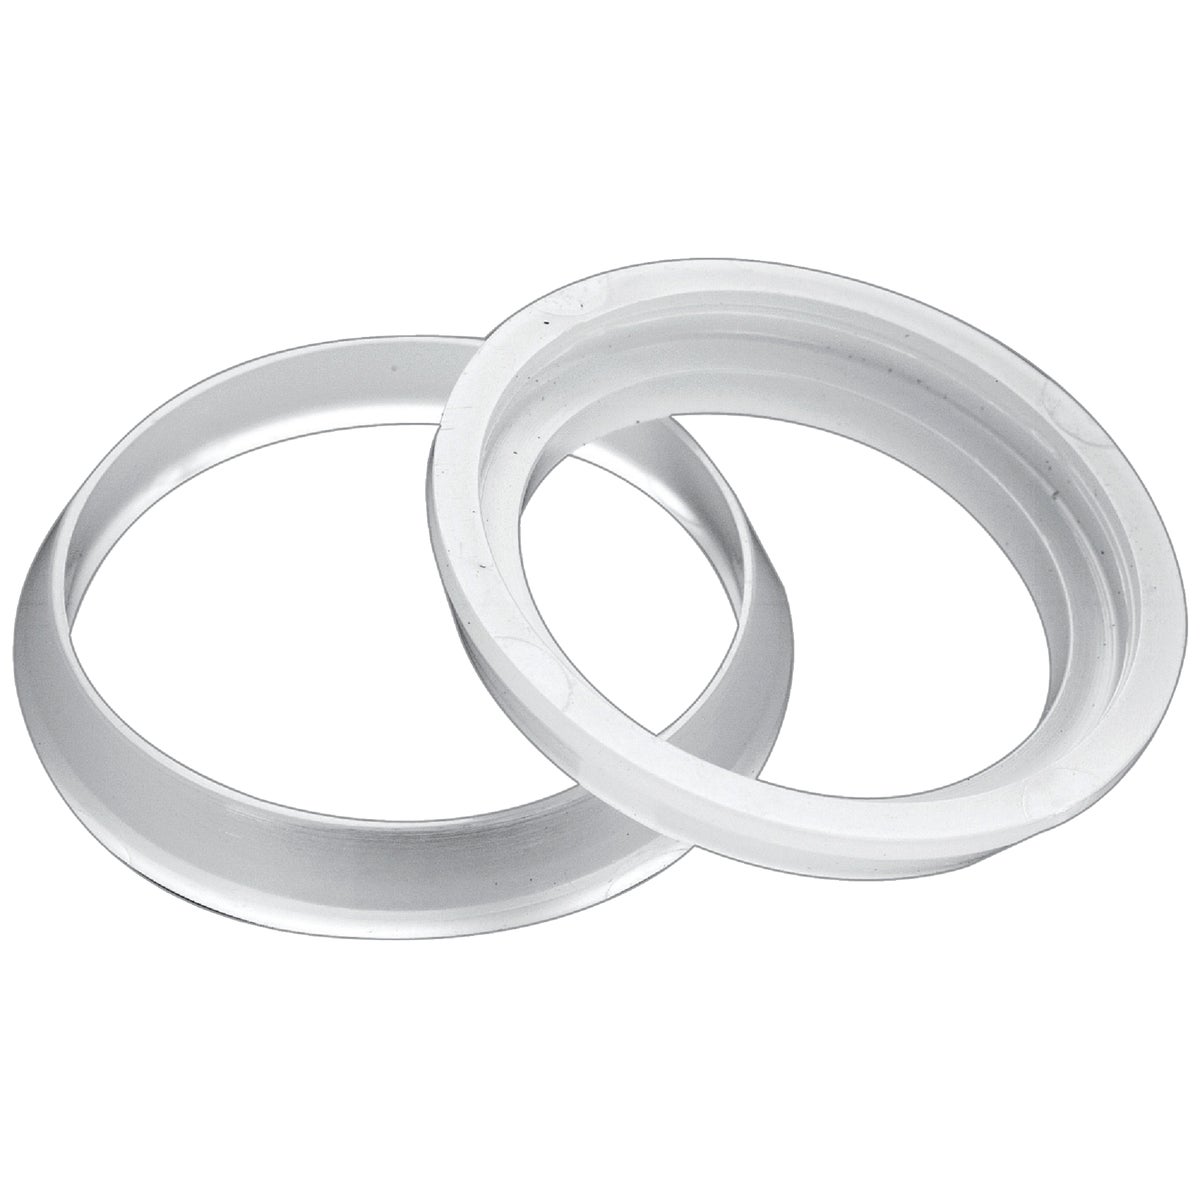 Item 443960, Poly slip-joint washers, 2 per bag